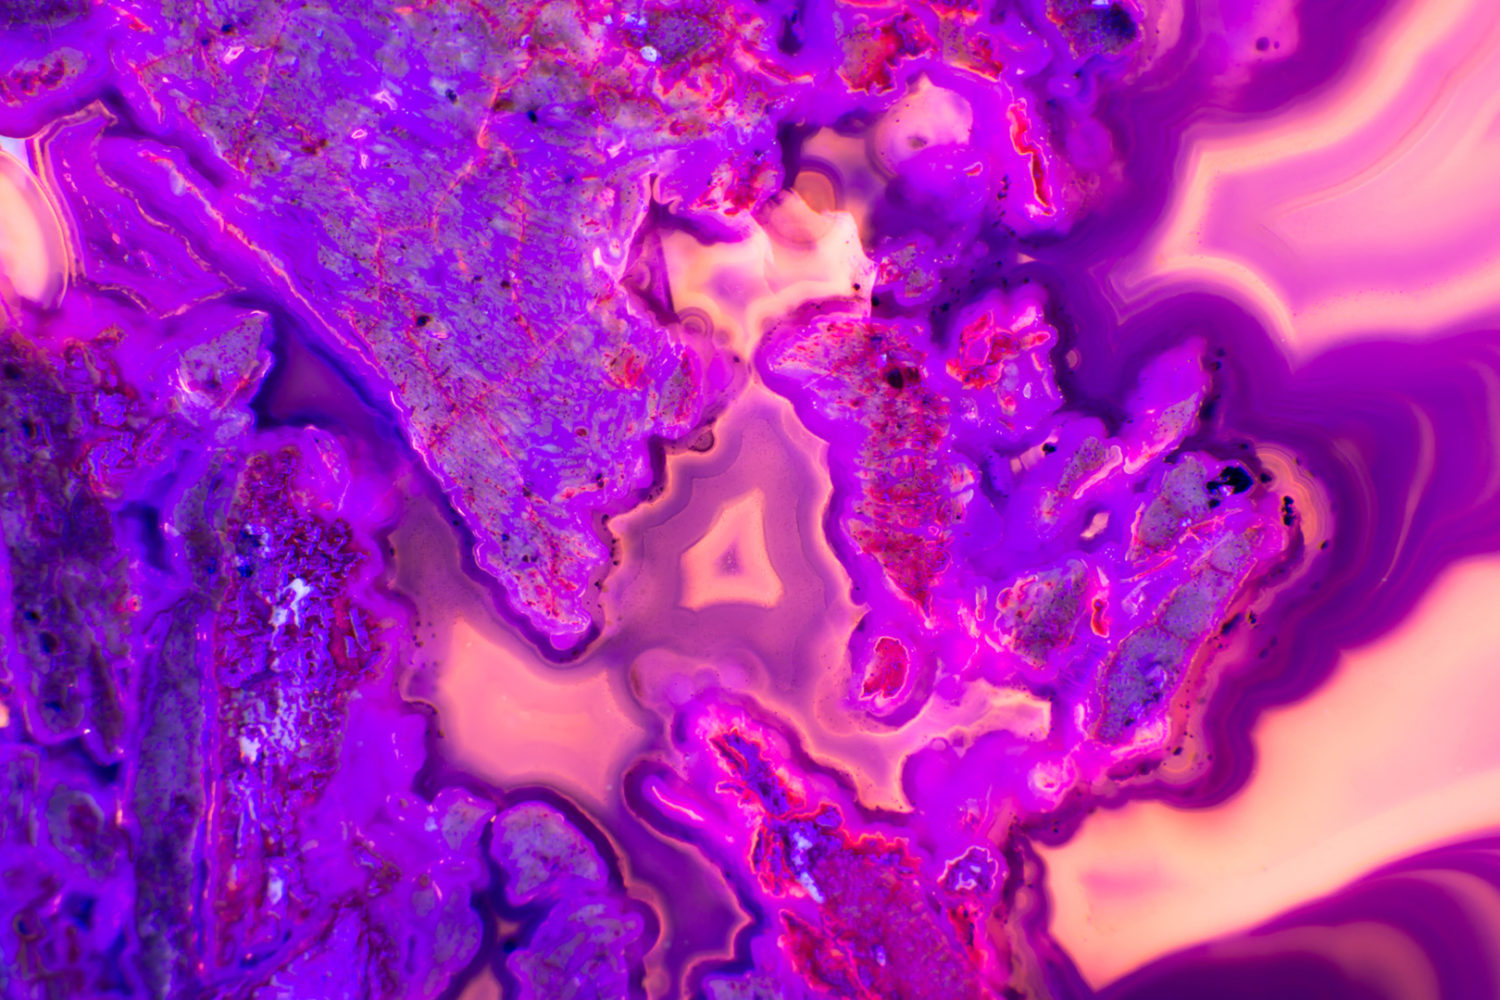 29 ultraviolet photos that'll make you fall in love with Pantone's Color of the Year